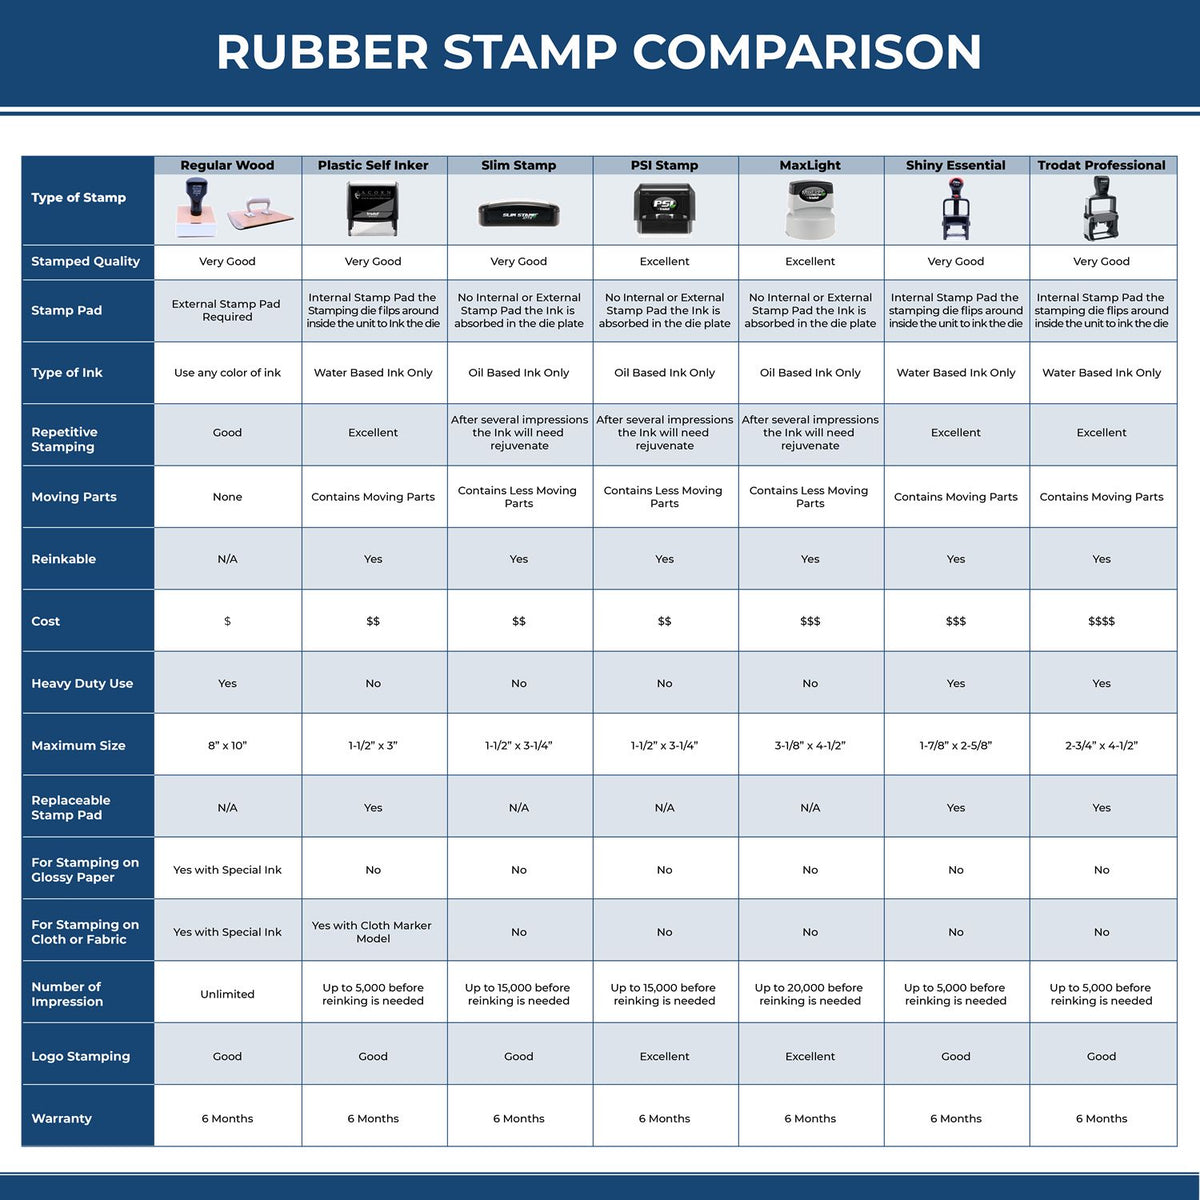 Large Self-Inking Please Pay Now No Statements will be Sent Stamp 4909S Rubber Stamp Comparison